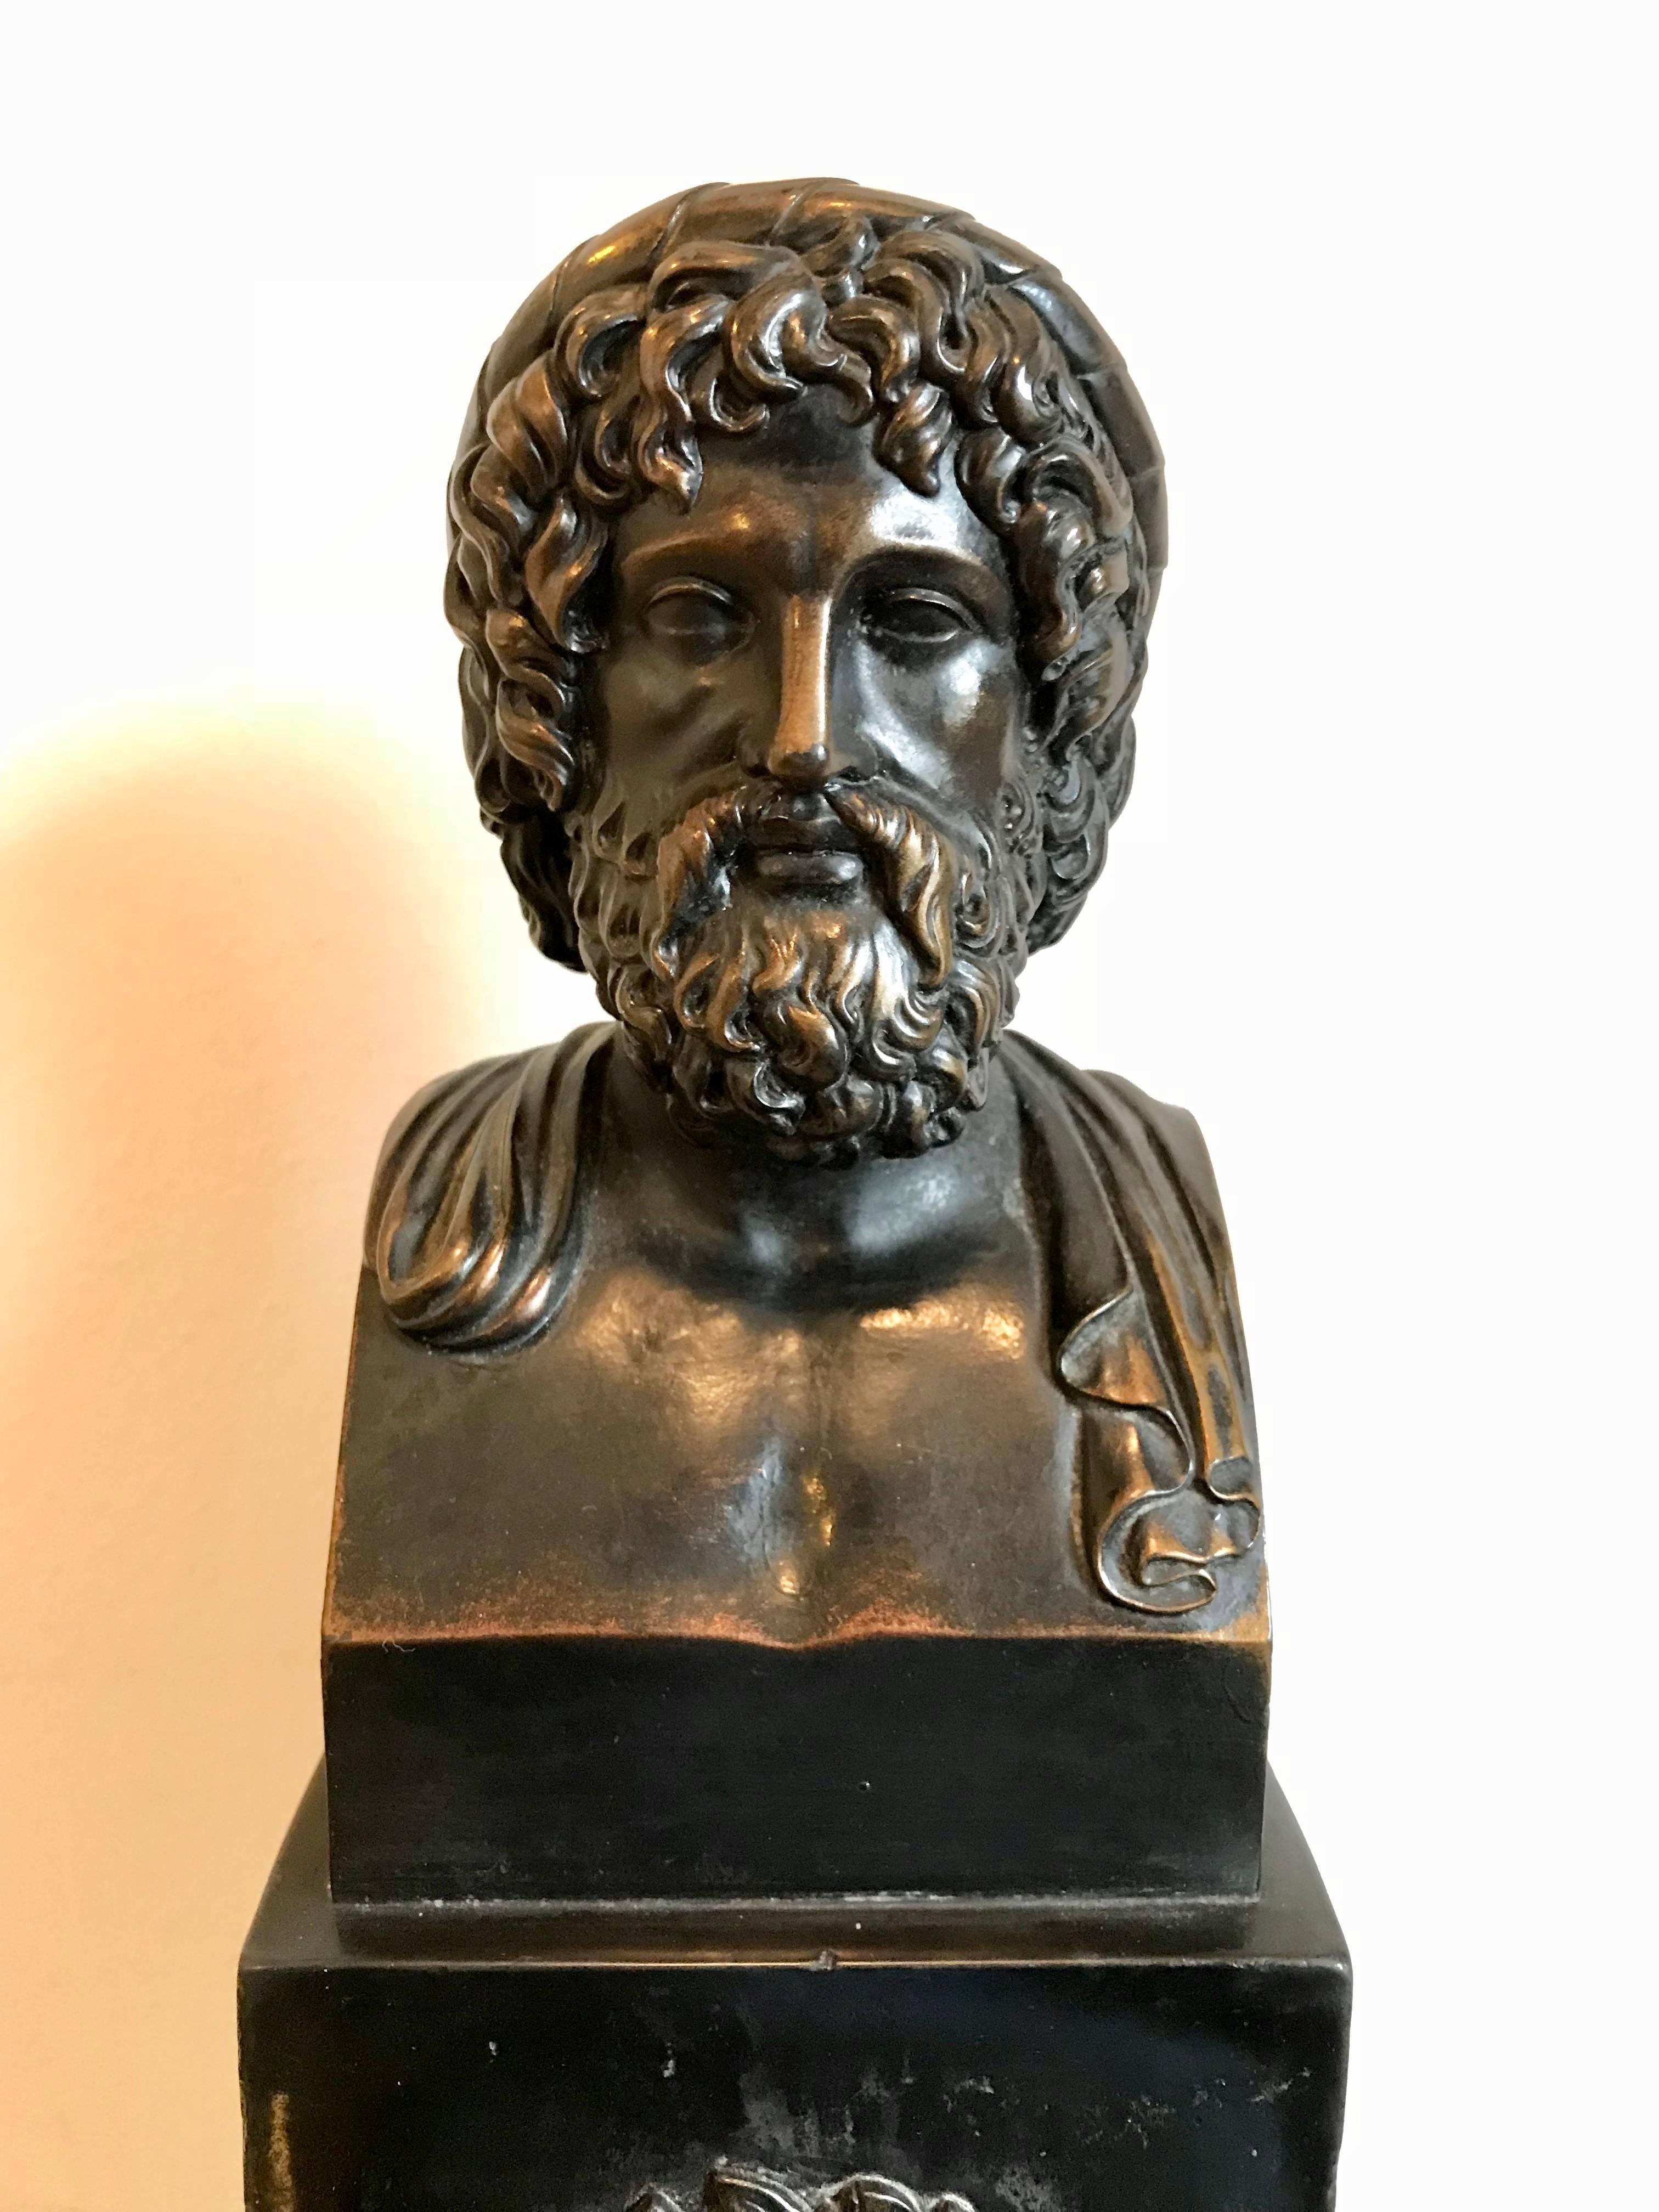 High quality Grand Tour bronze bust of Asclepius depicting the bearded Greek god on a faux marble Scagliola plinth. Modelled after an ancient Roman marble original. The black stepped base with a laurel wreath in relief.
A great gift for your